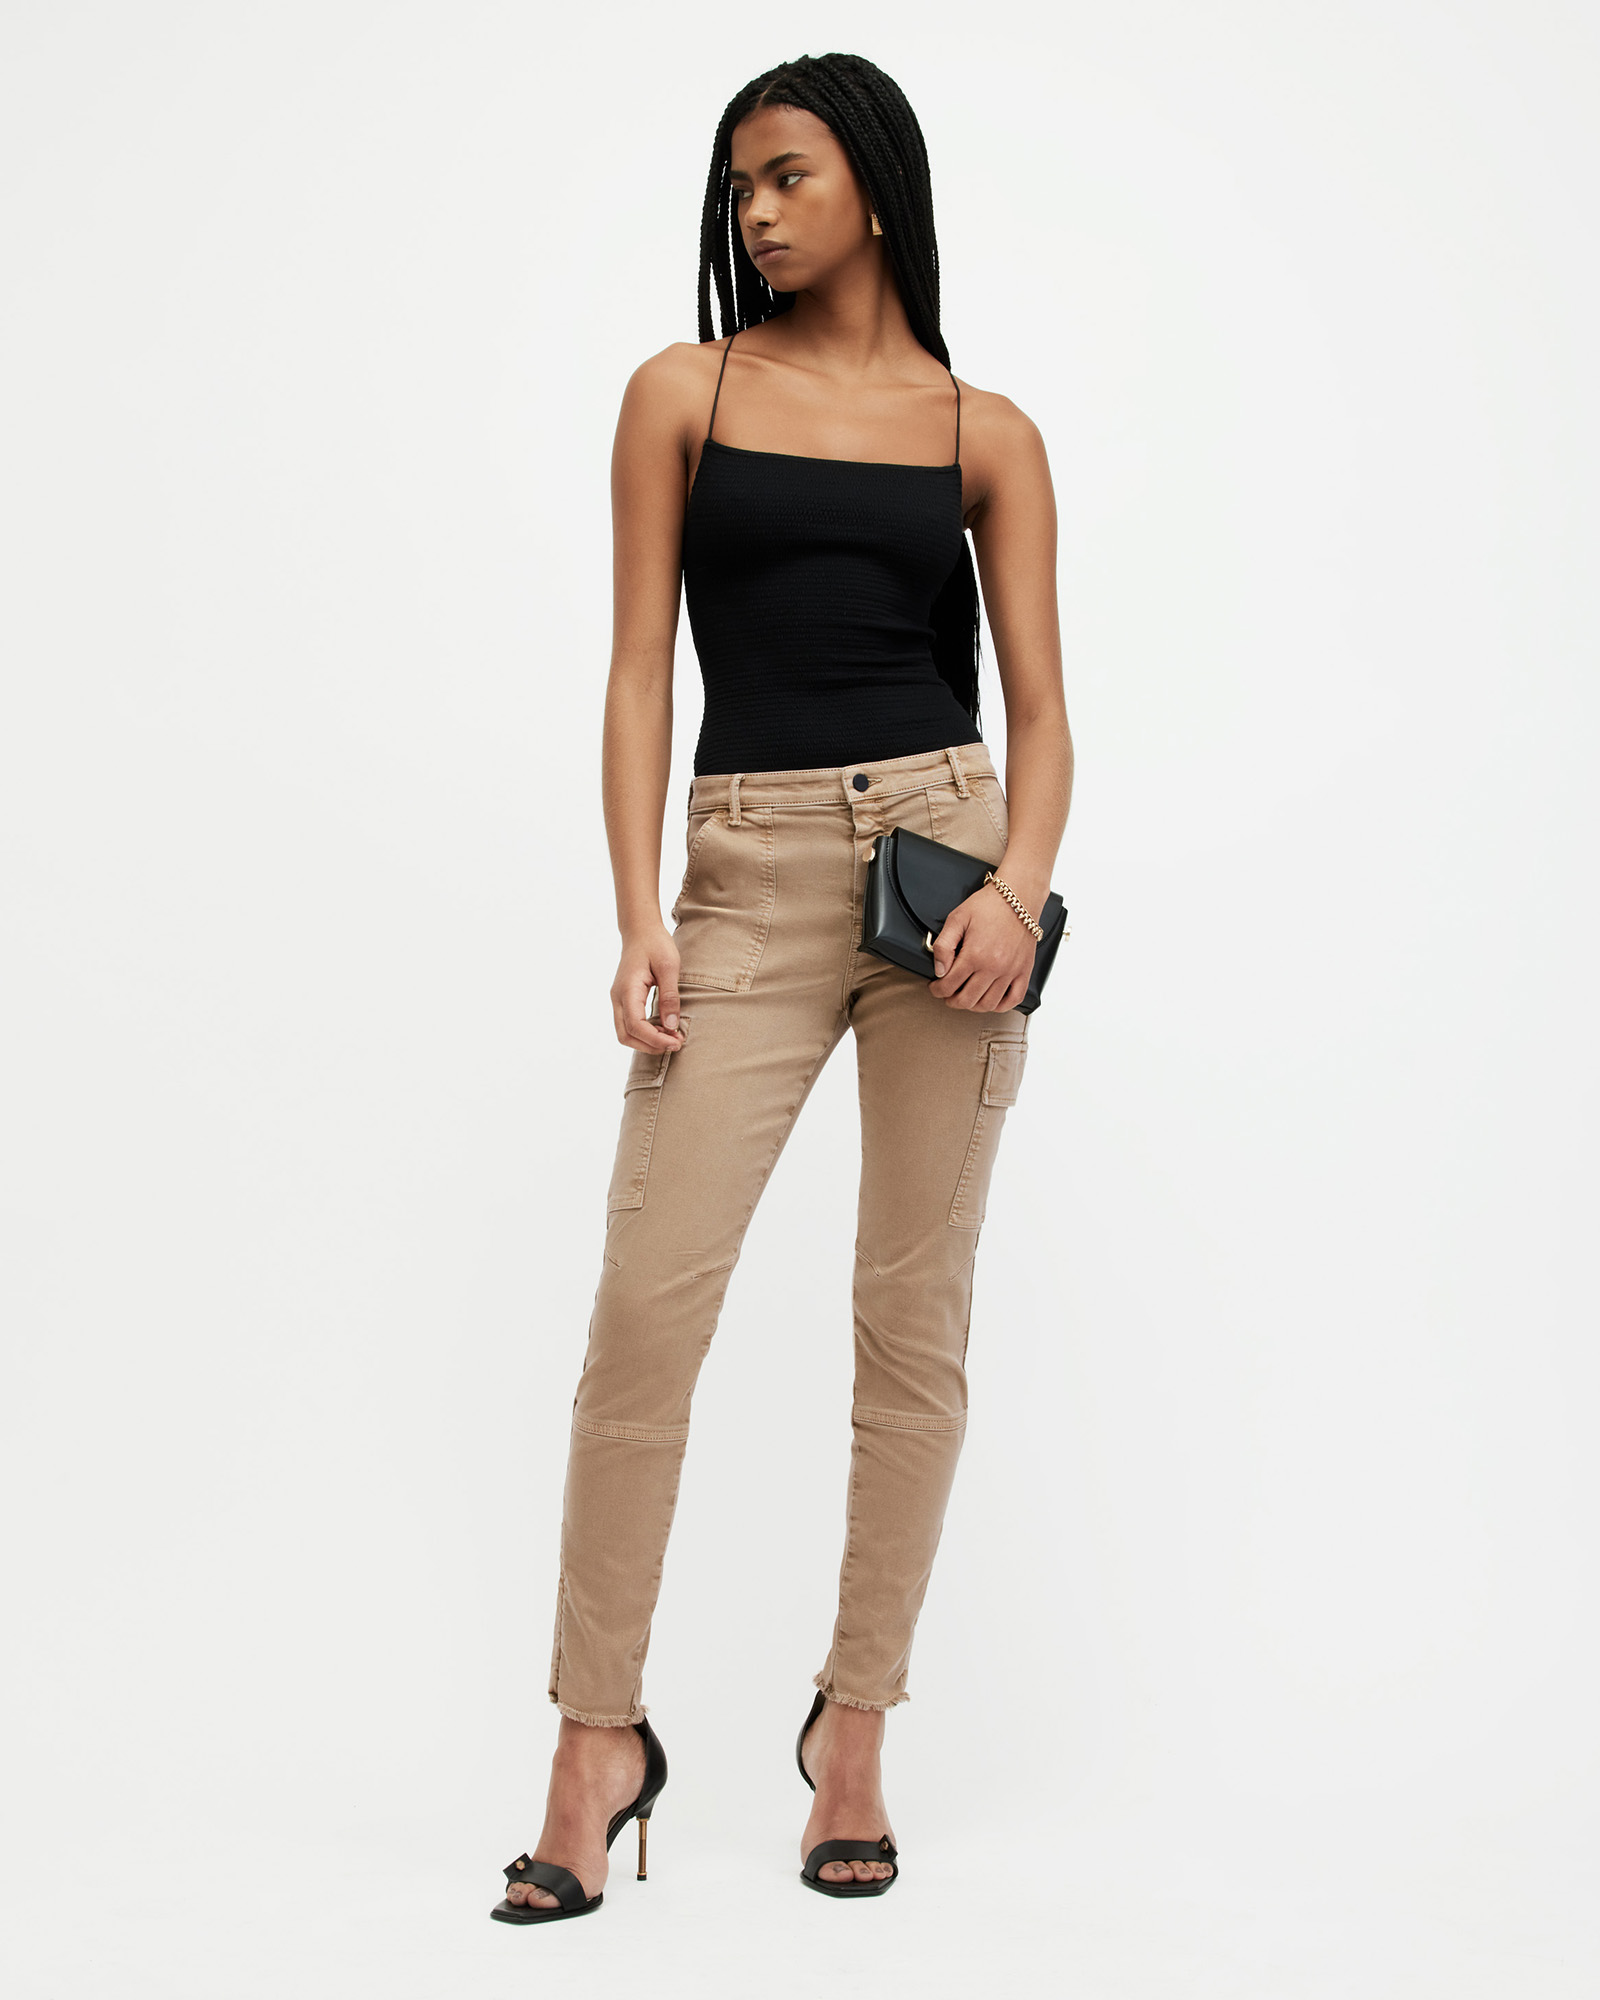 AllSaints Duran Overdyed Skinny Cargo Jeans,, CAMEL BROWN